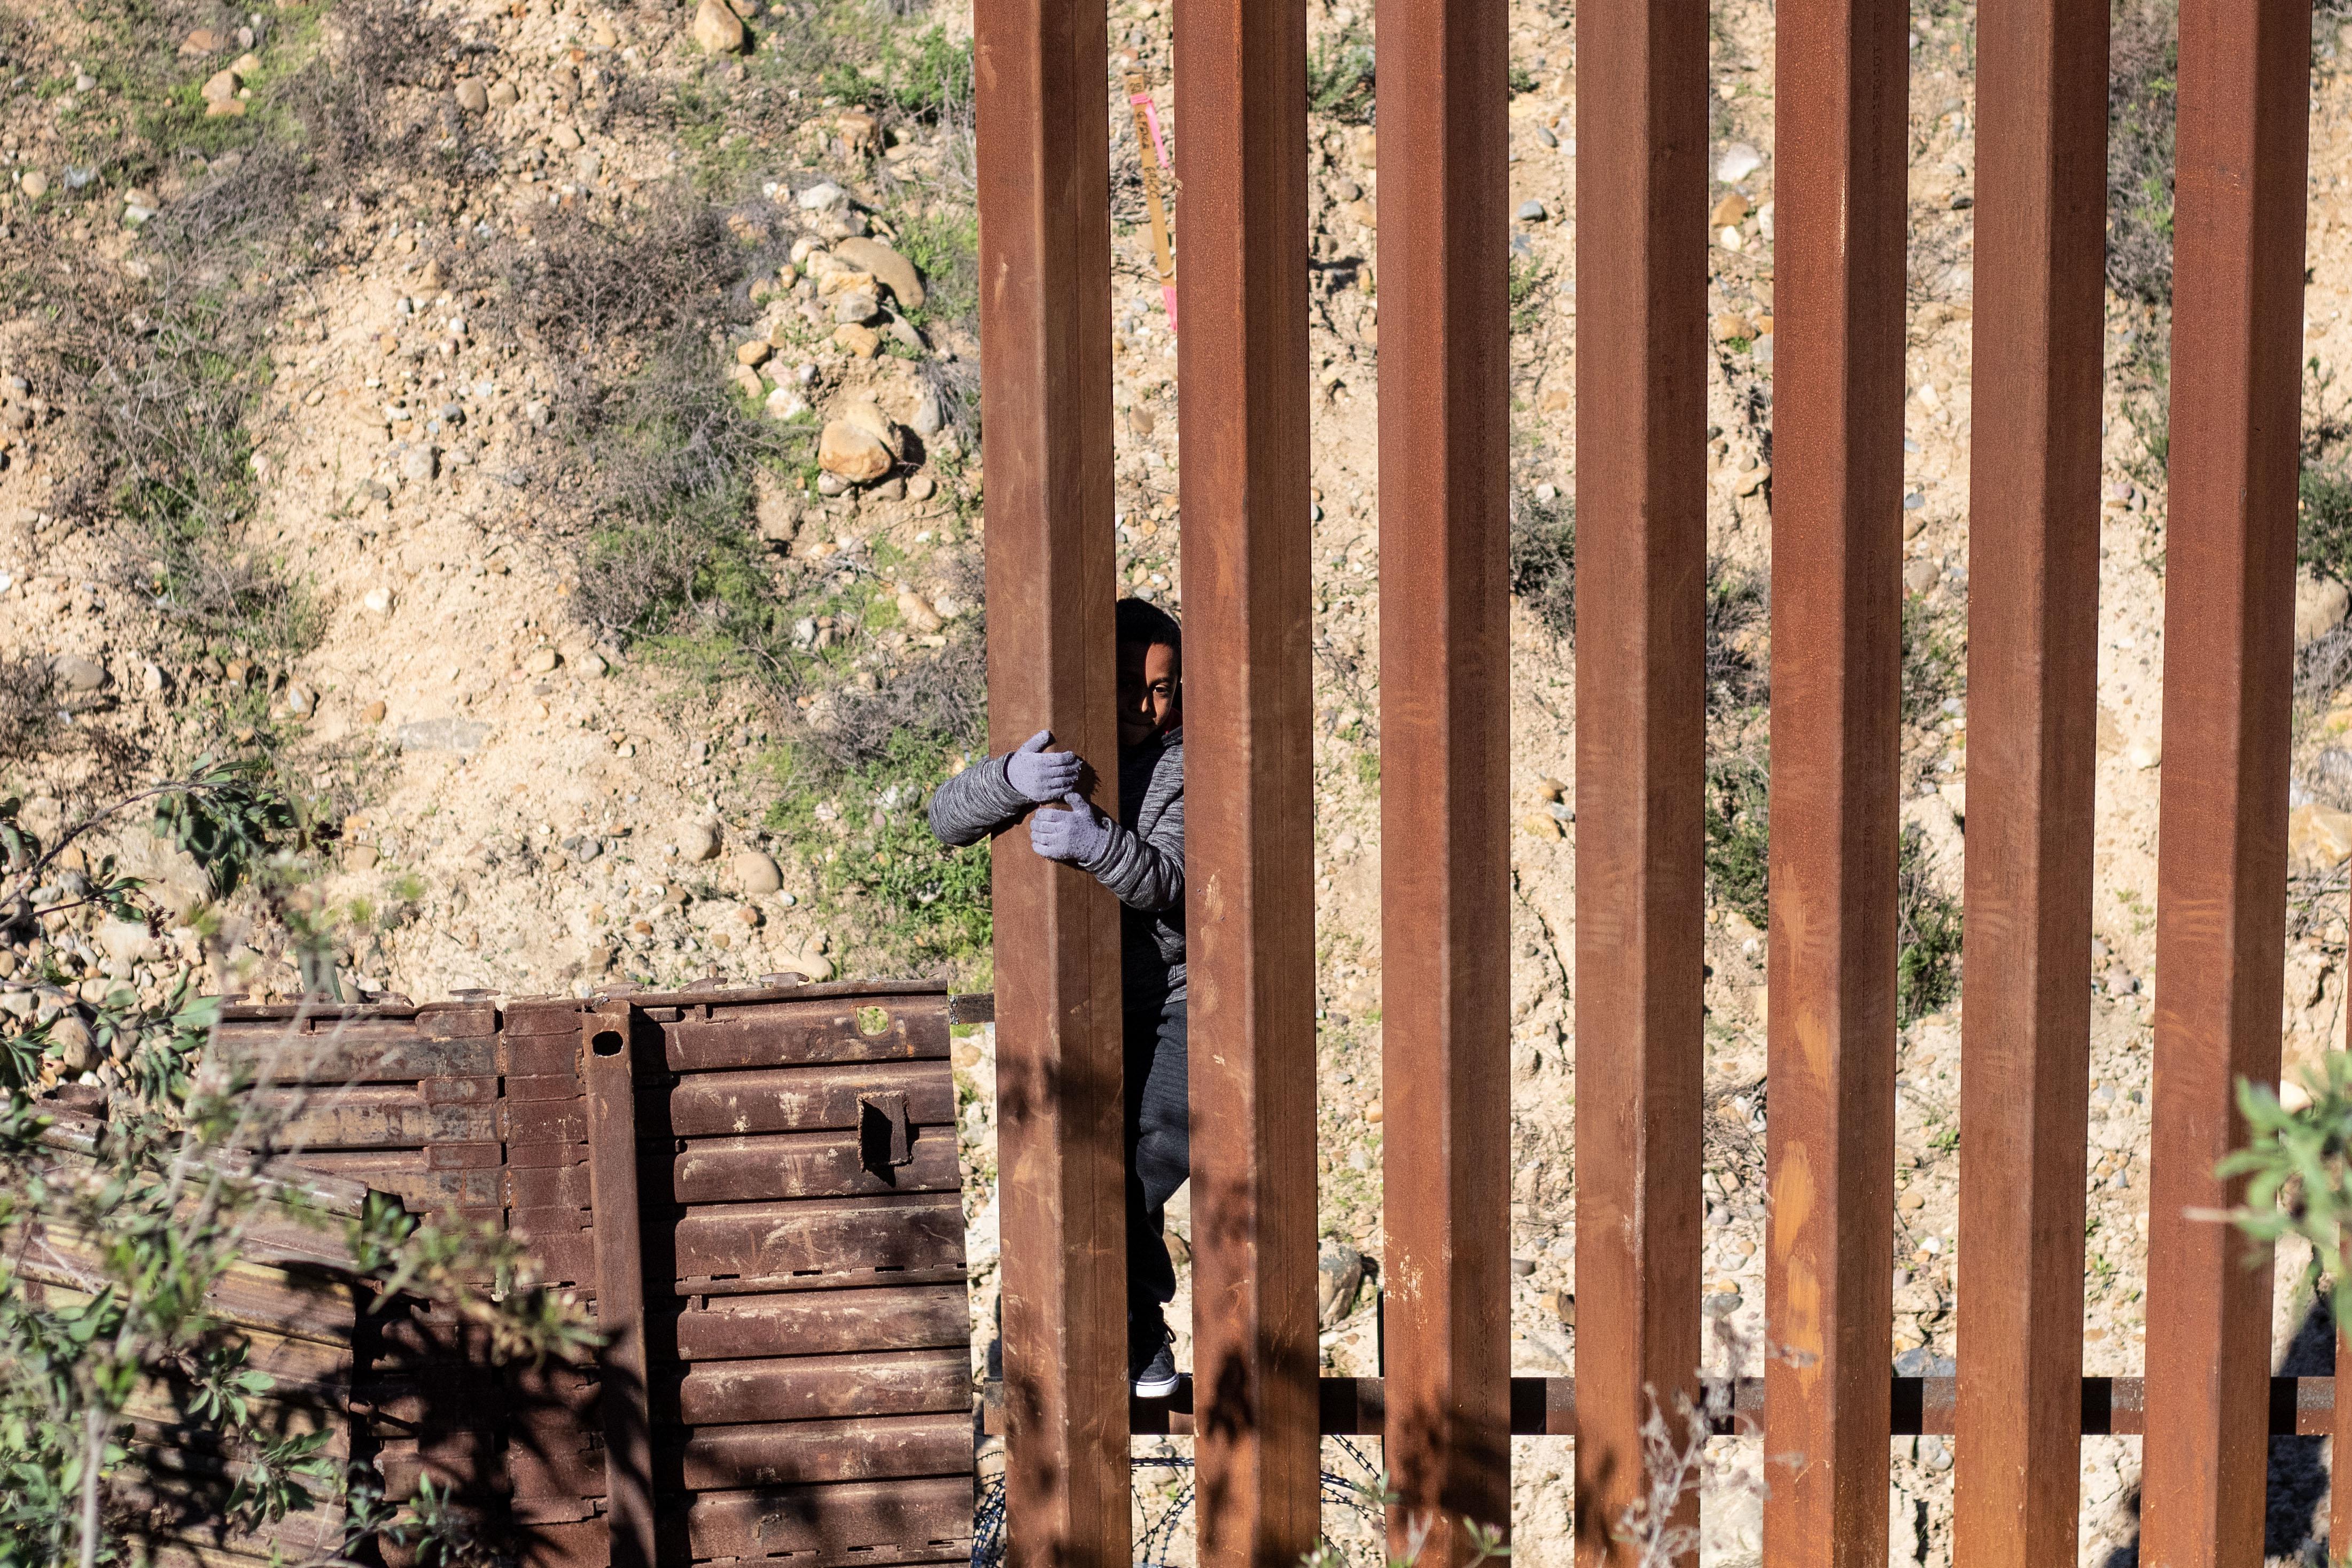 Mexican migrant child Kevin Andres, from Guerrero state, crosses the US-Mexico border fence from Tijuana to San Diego County in the US, as seen from Tijuana, Baja California state, Mexico, on December 28, 2018. 